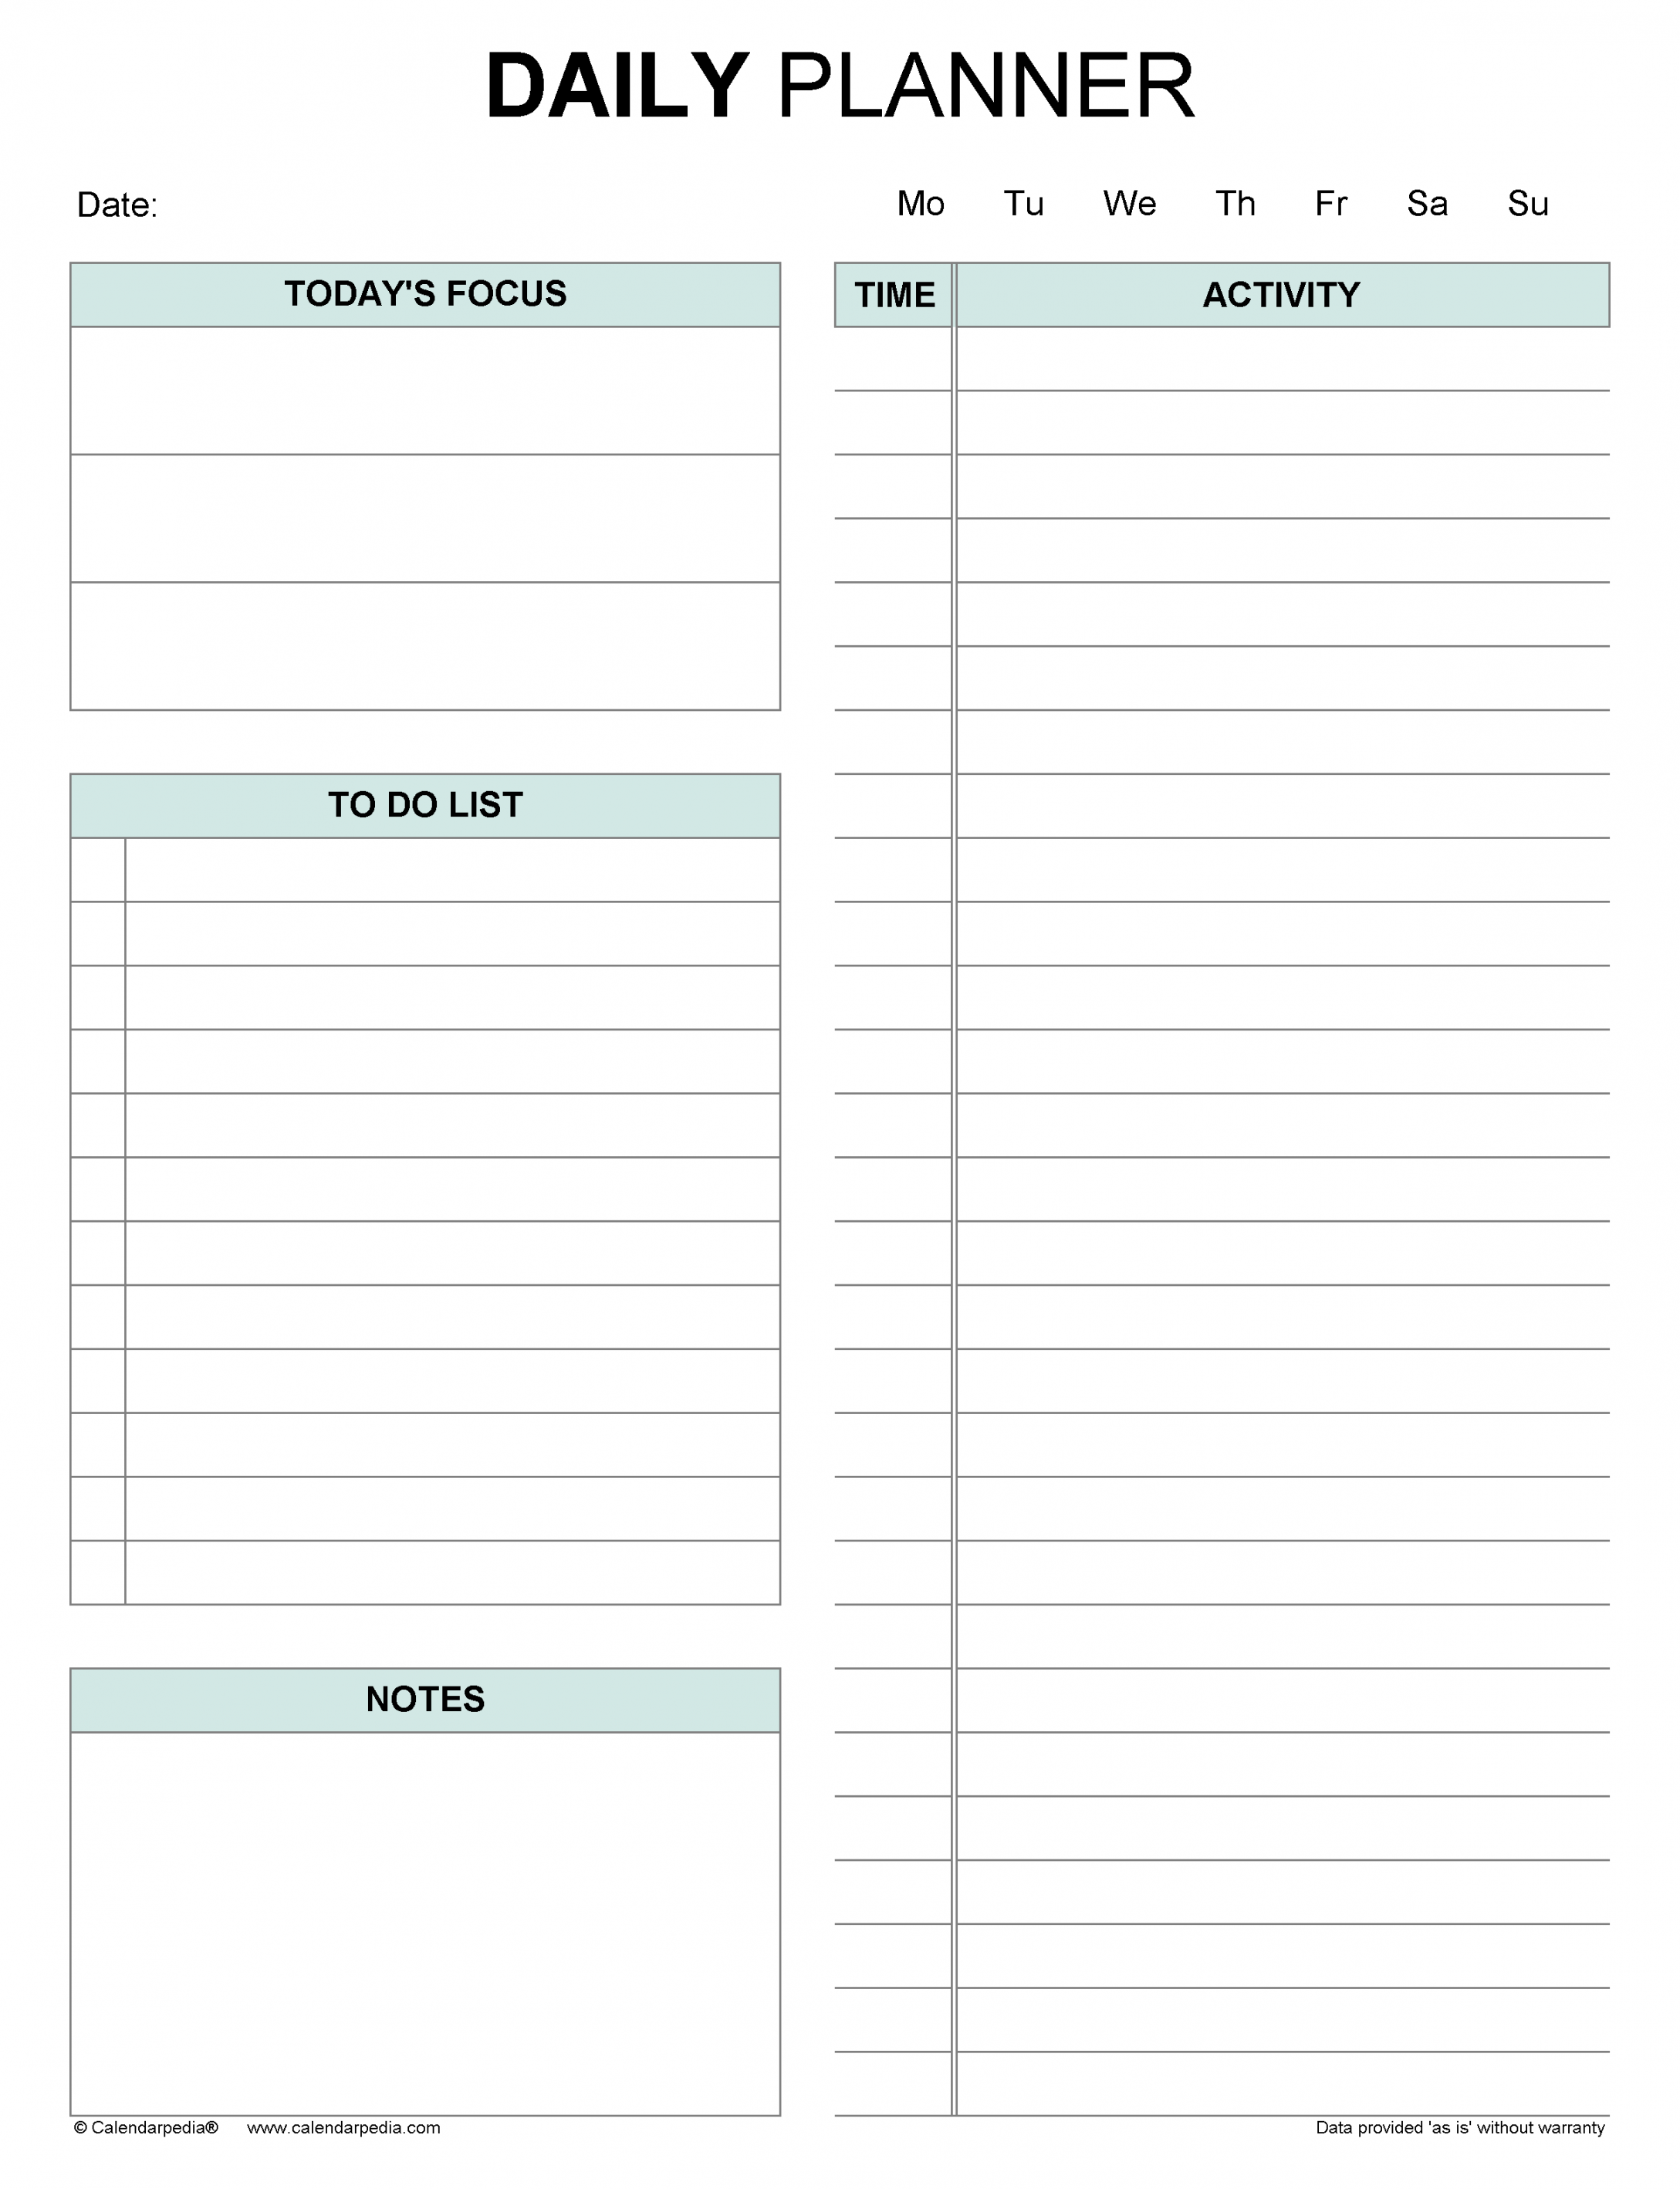 Daily Planners in Microsoft Excel Format - + Templates